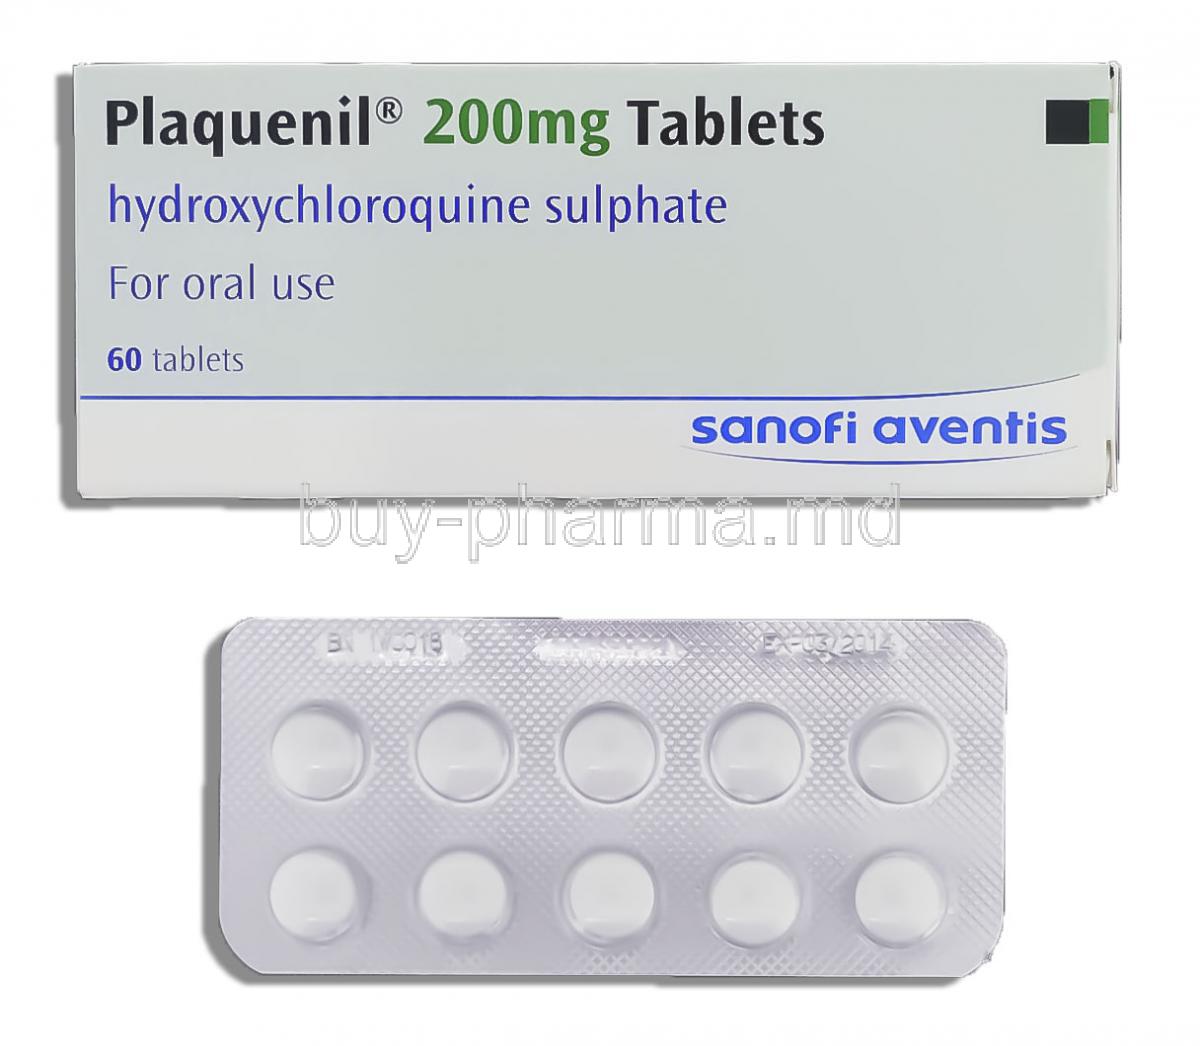 Prednisolone ophthalmic goodrx